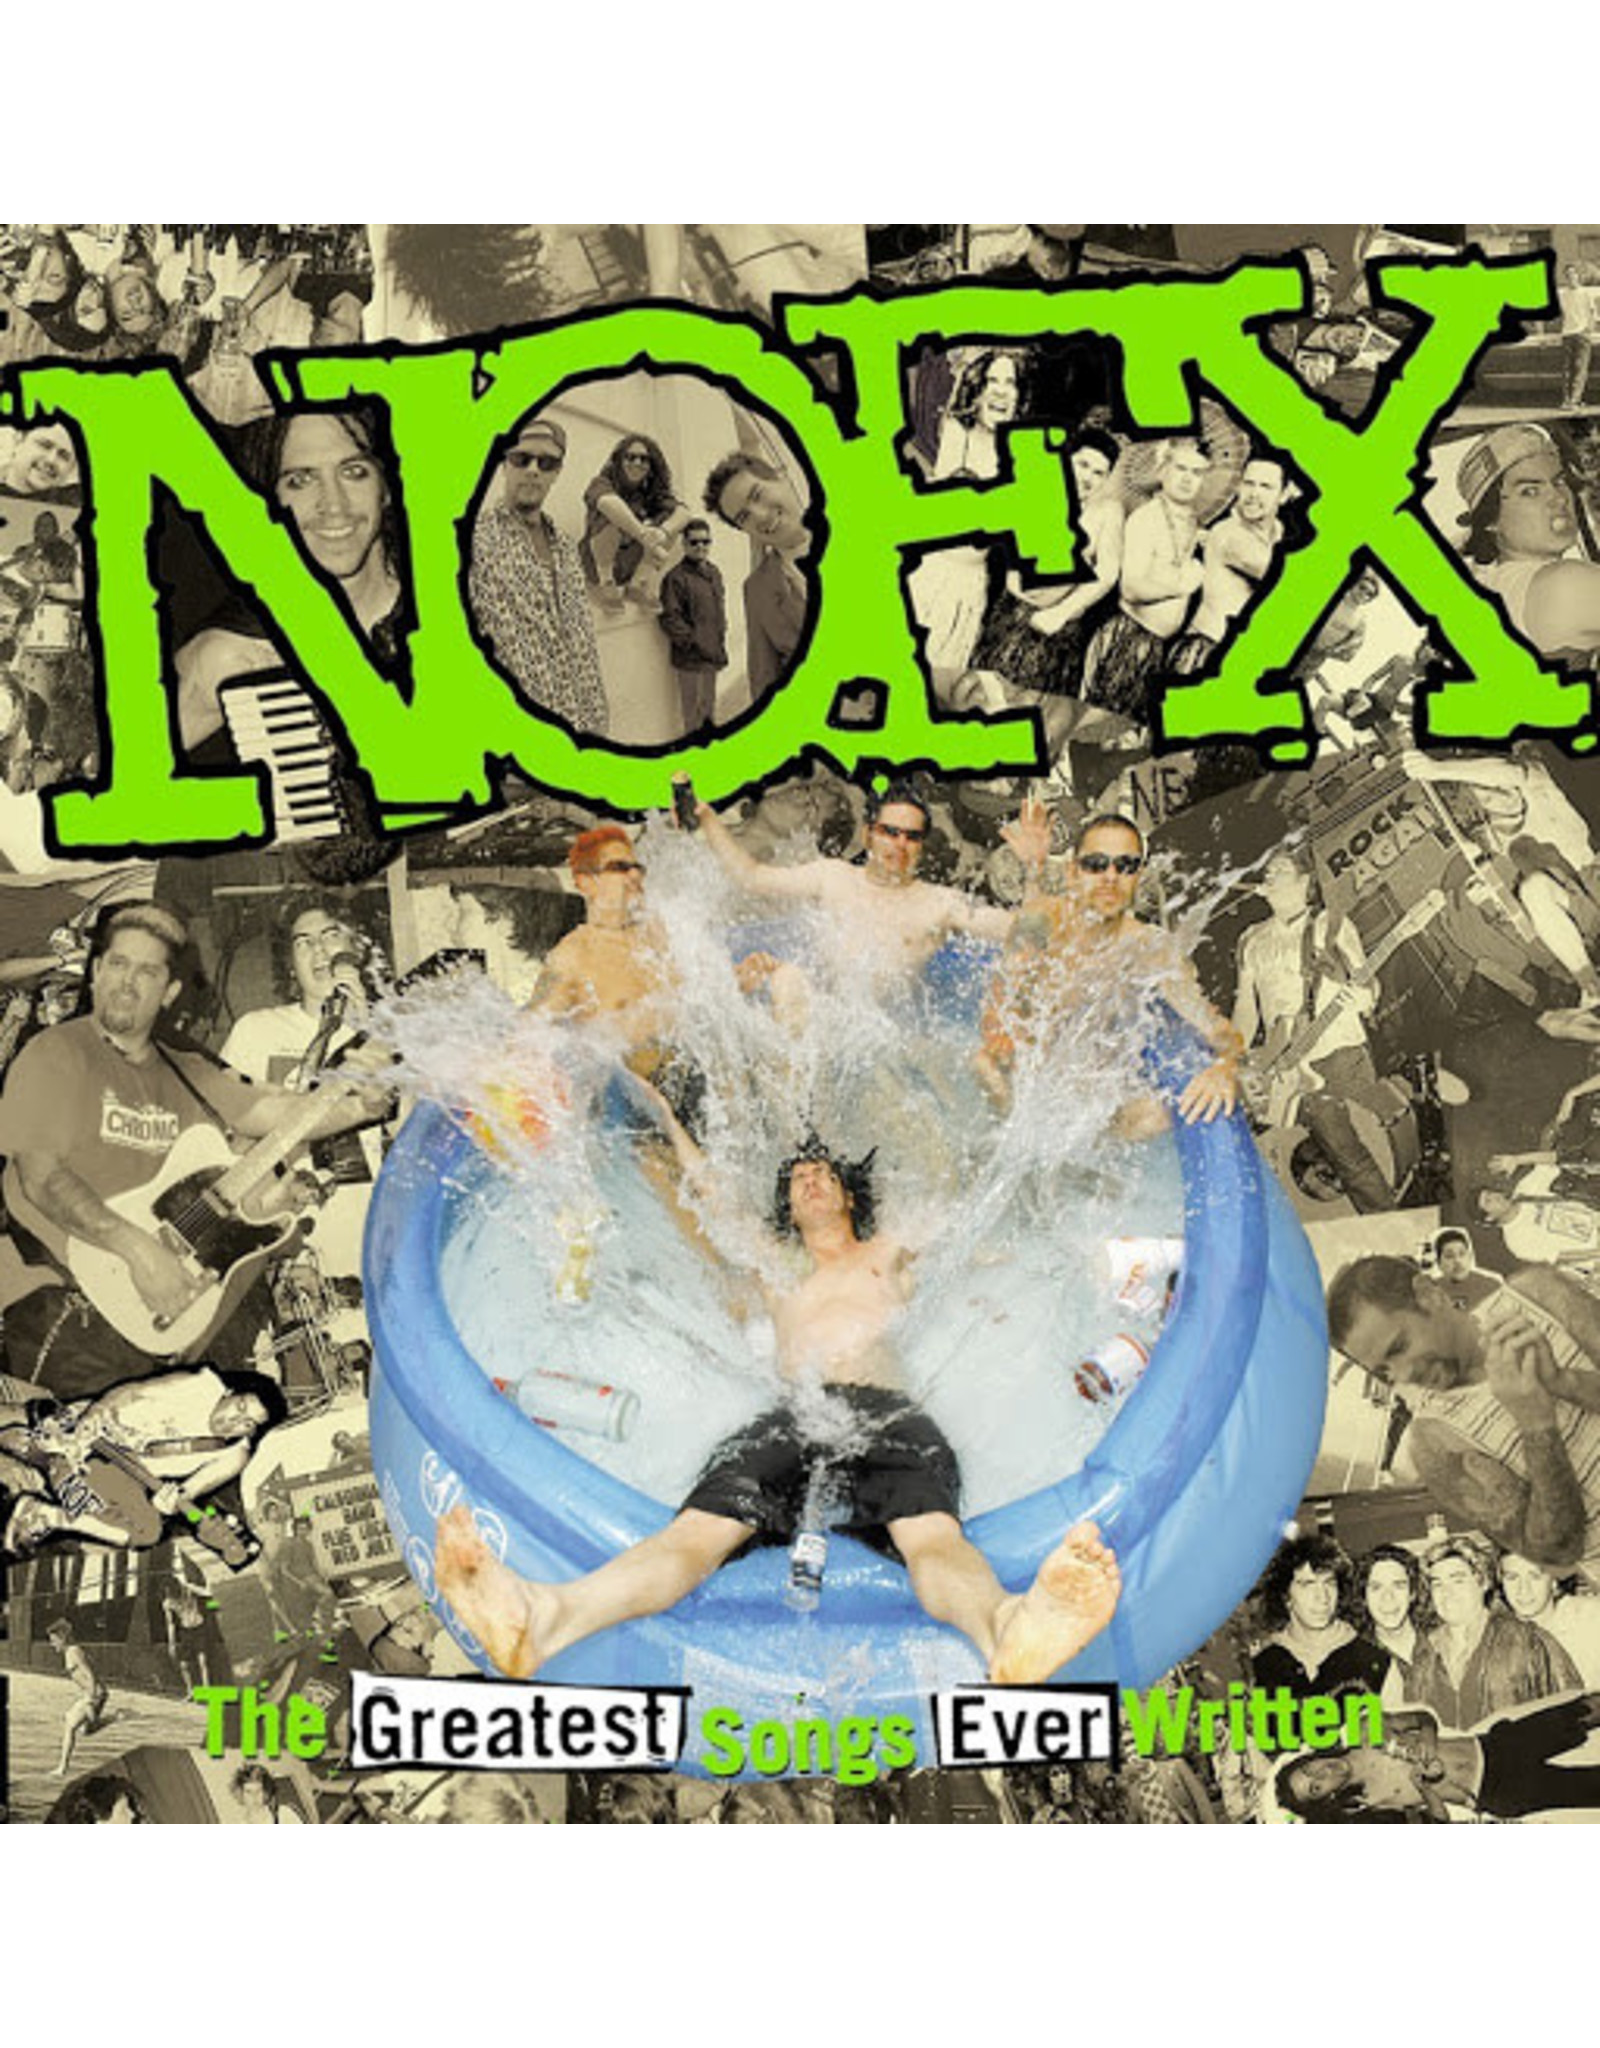 NOFX - The Greatest Songs Ever Written 2LP